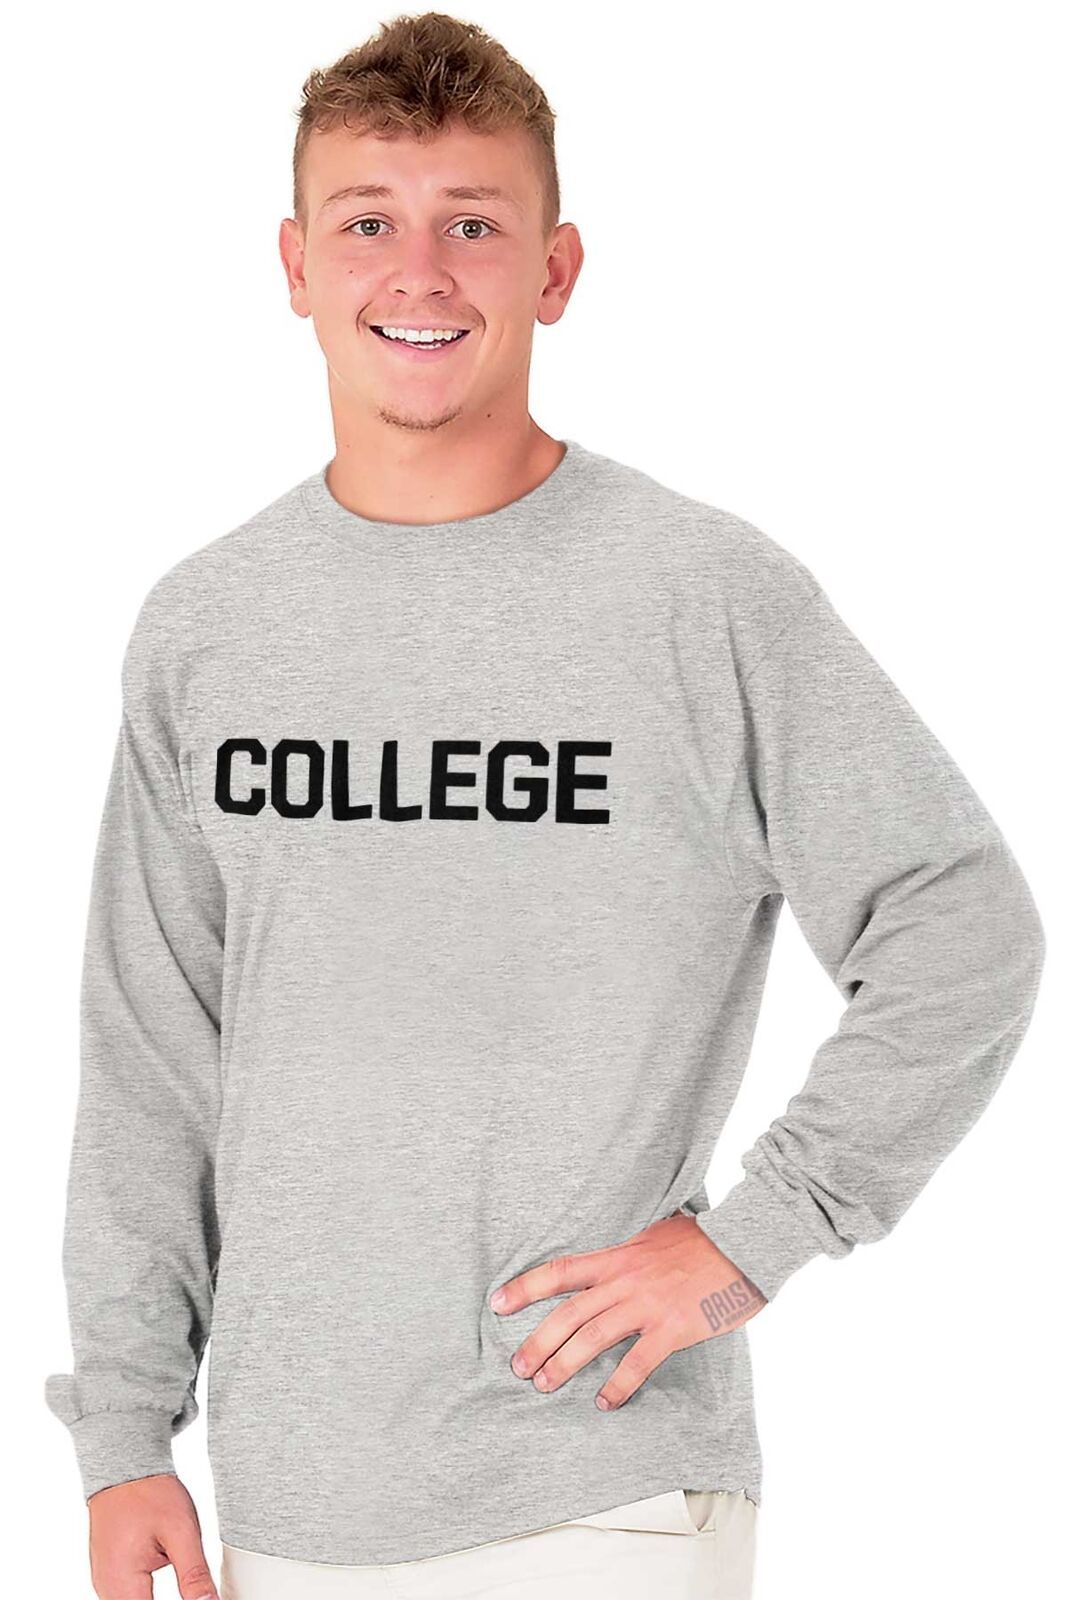 College Shirt University Cool Party Beer School Gift Idea Gym Long ...